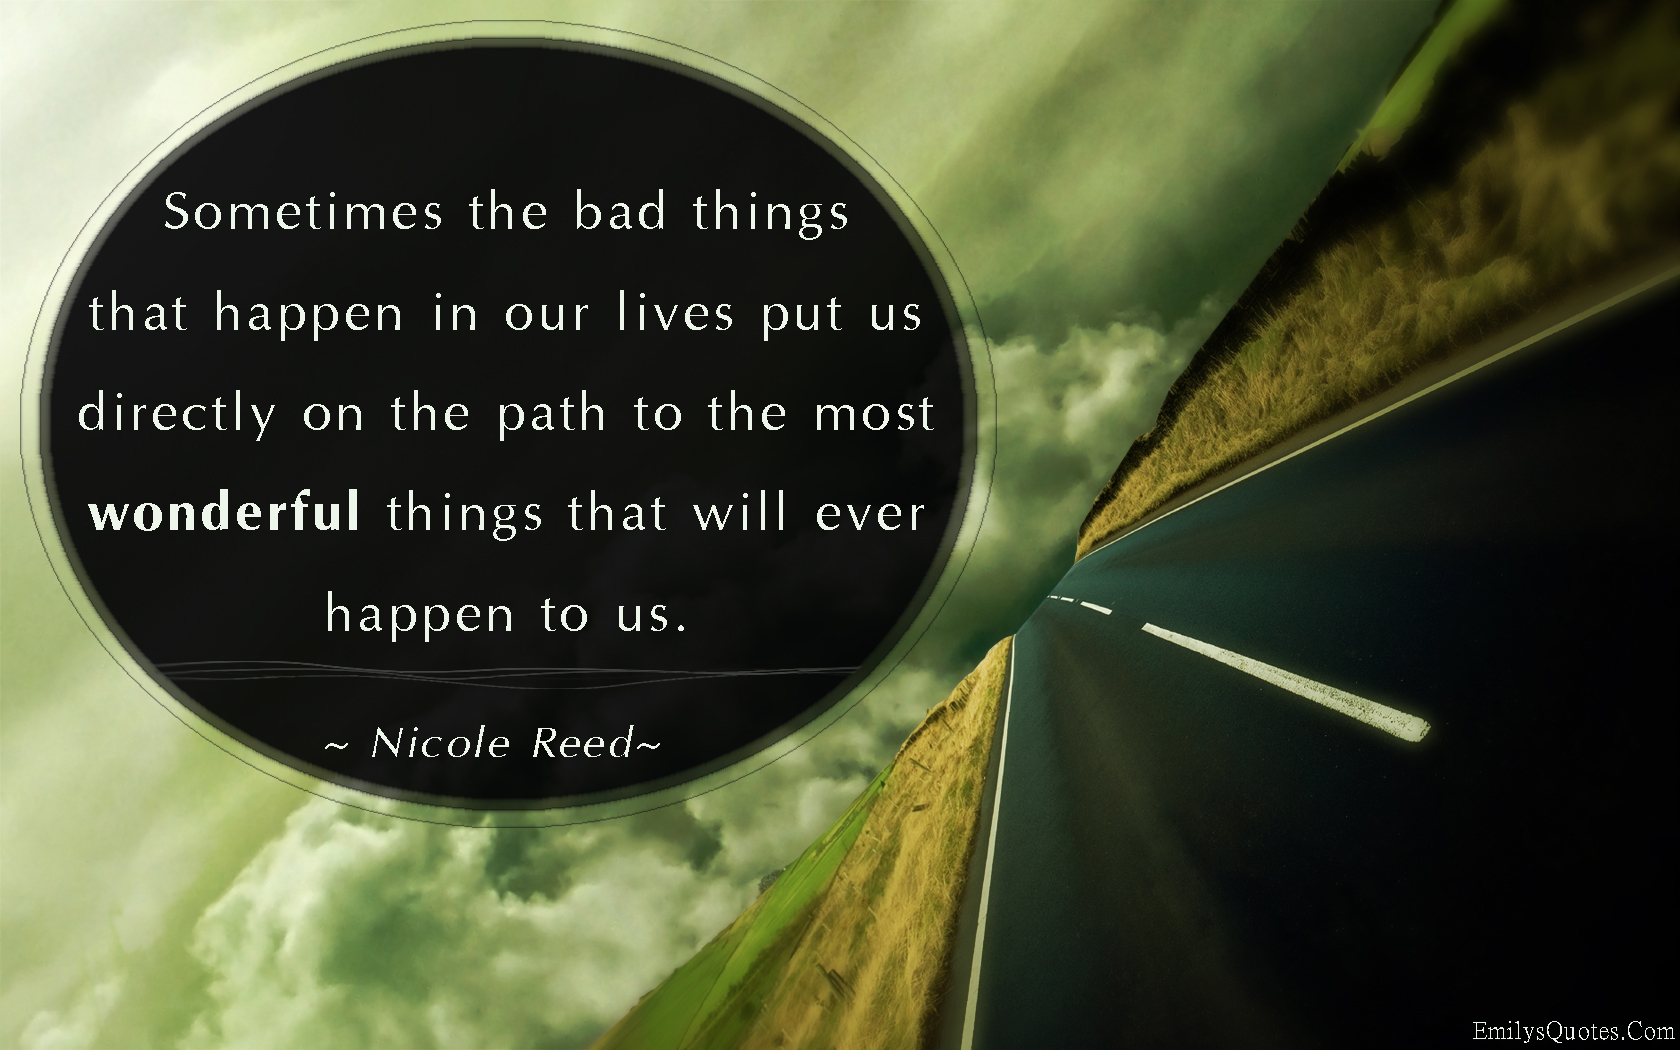 Sometimes the bad things that happen in our lives put us directly on the path to the most wonderful things that will ever happen to us